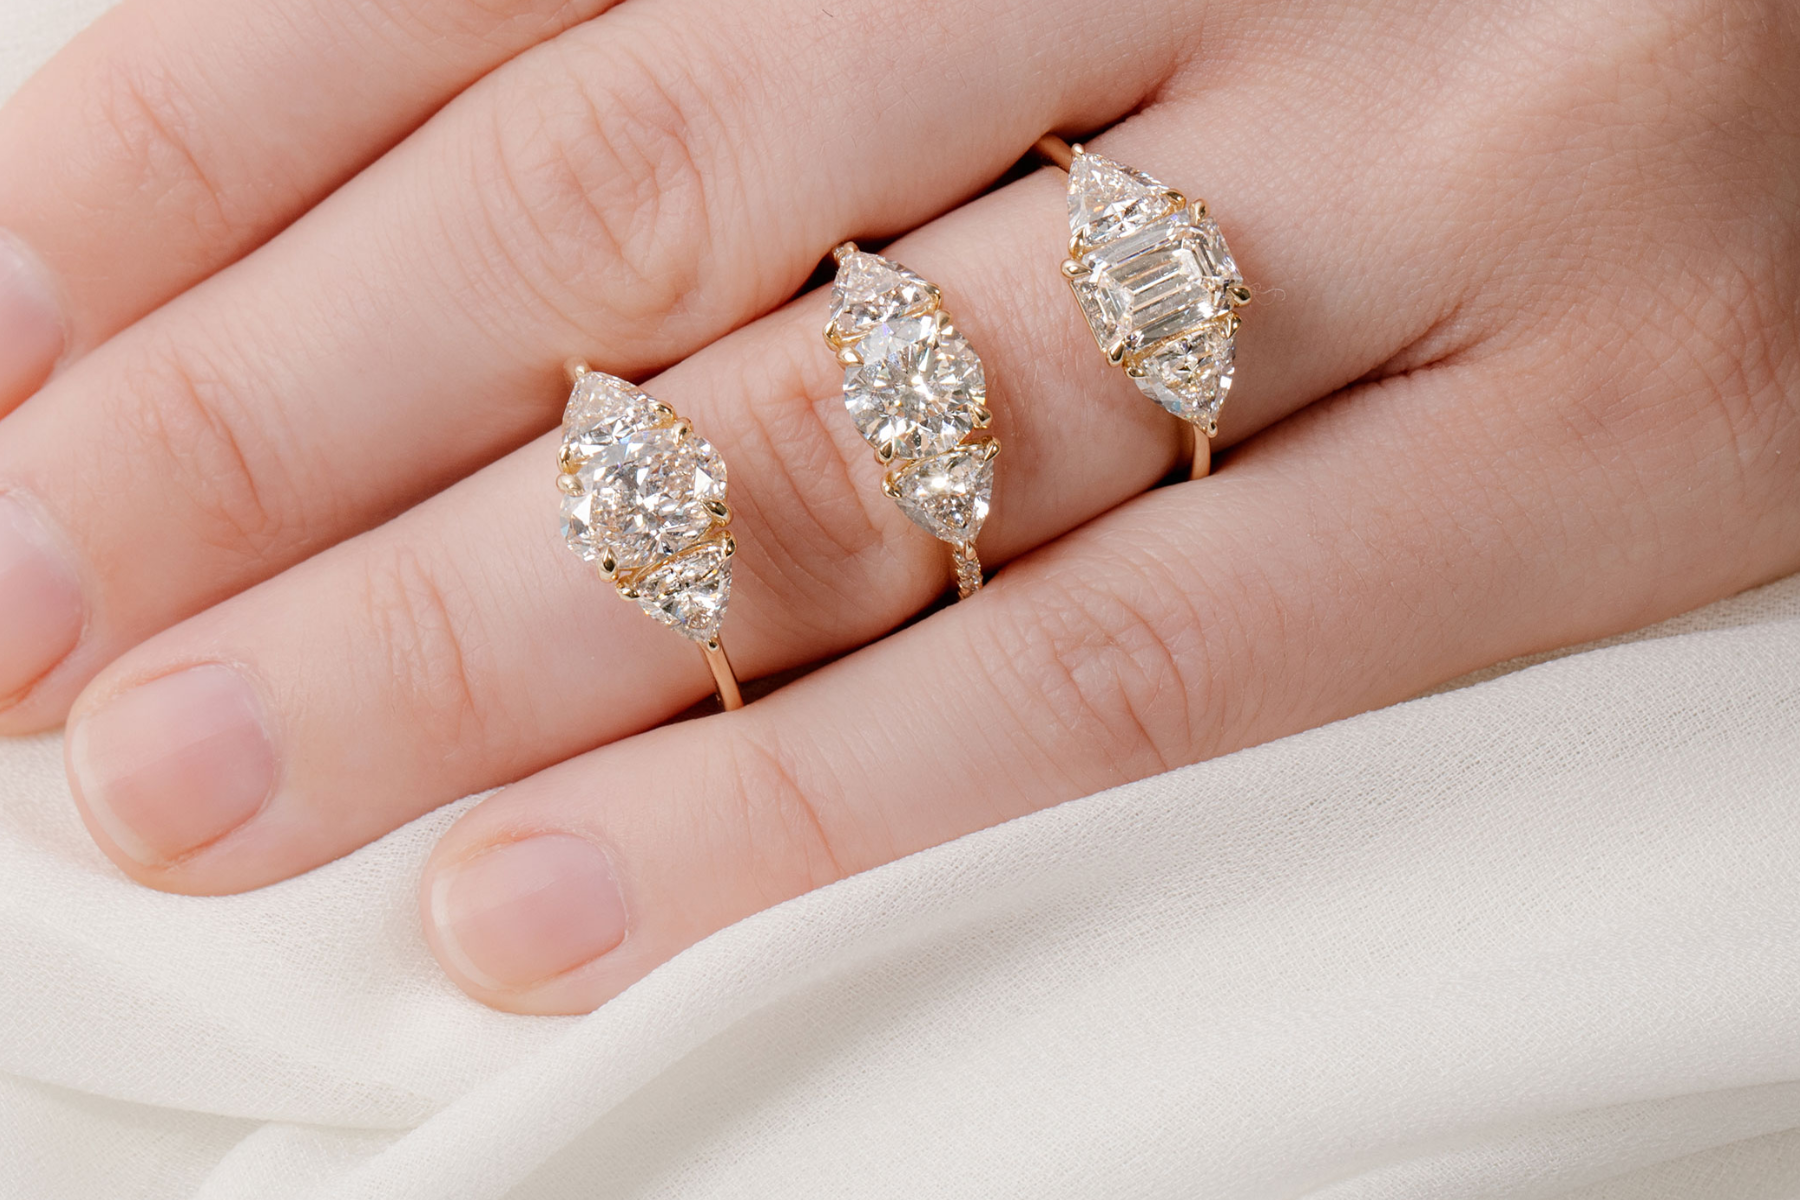 A close-up of a woman's hand showcasing three engagement rings, each with three stones